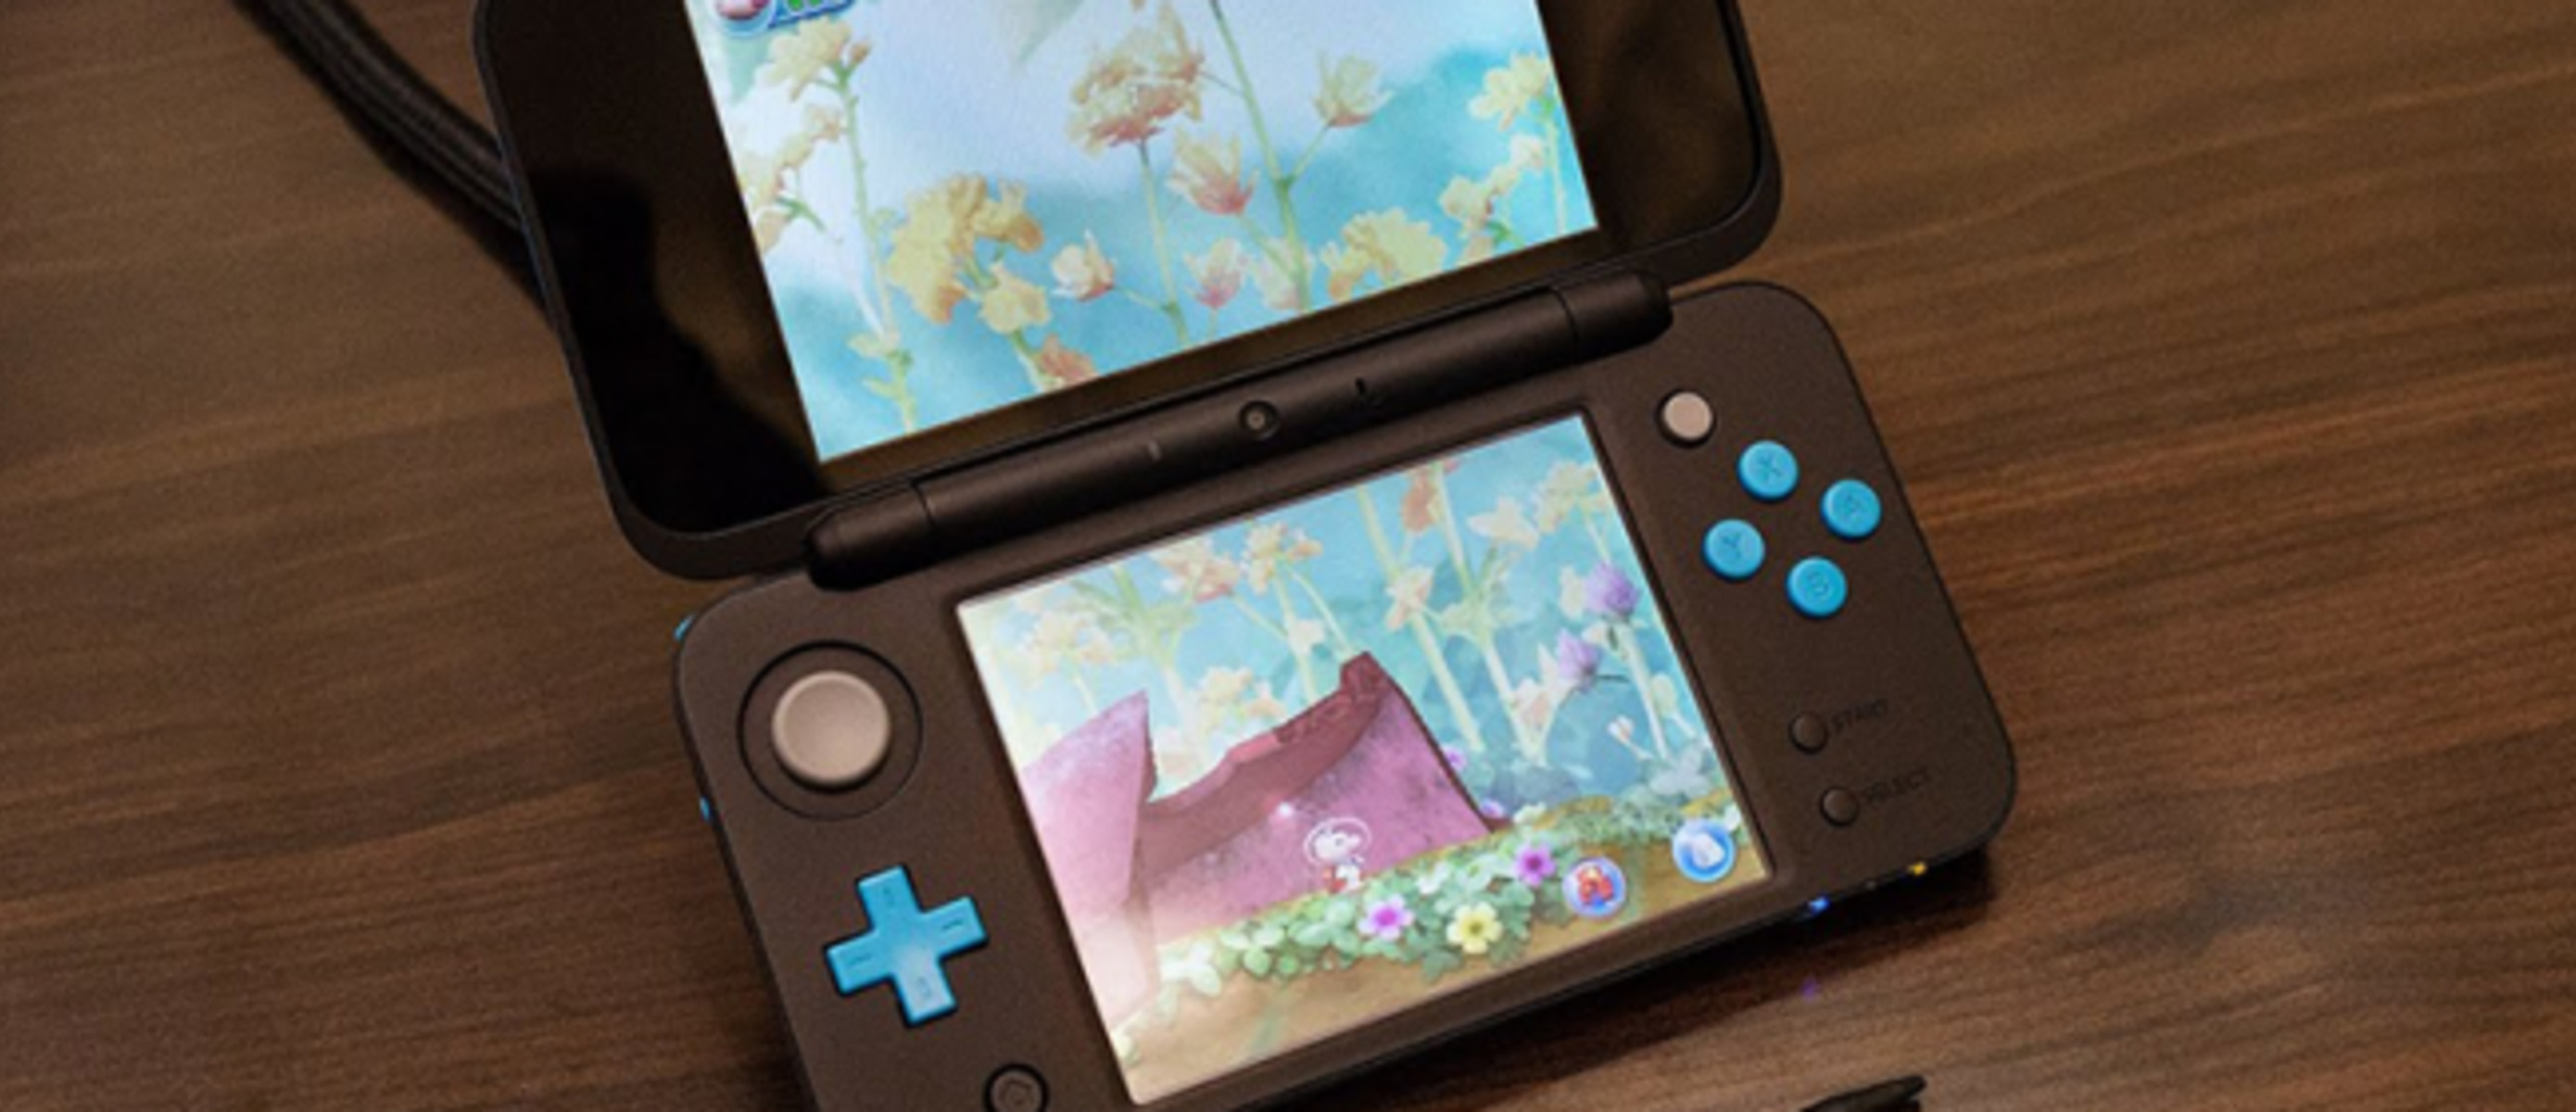 New 2ds xl. Нинтендо 2ds XL. New Nintendo 2ds XL. Nintendo Switch 2ds XL. Нинтендо свитч 3ds XL.